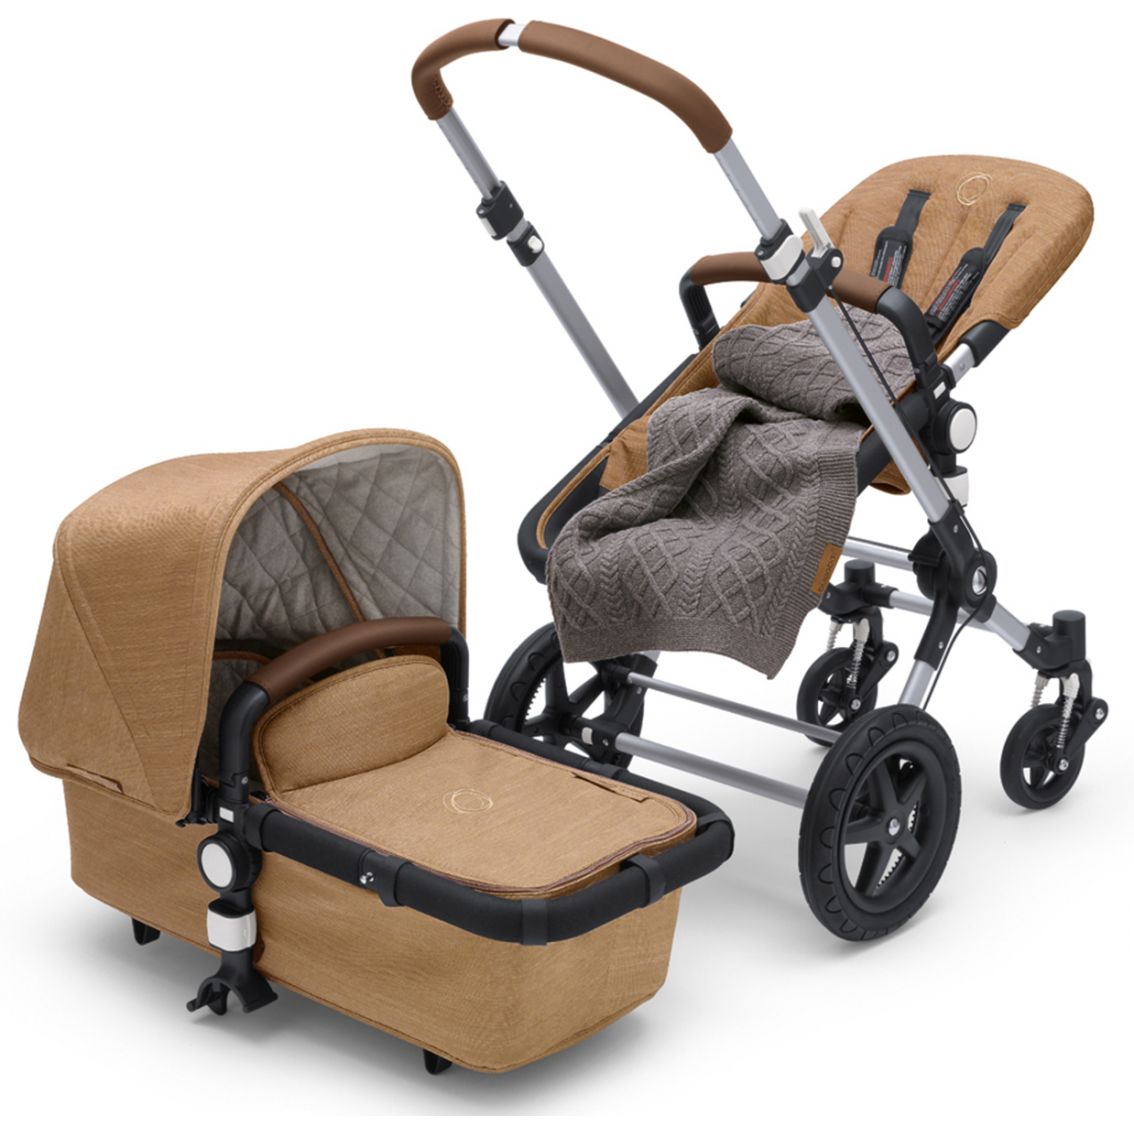 The Bugaboo Cameleon 3 Review  The Brave Wonderful World of Mommyhood